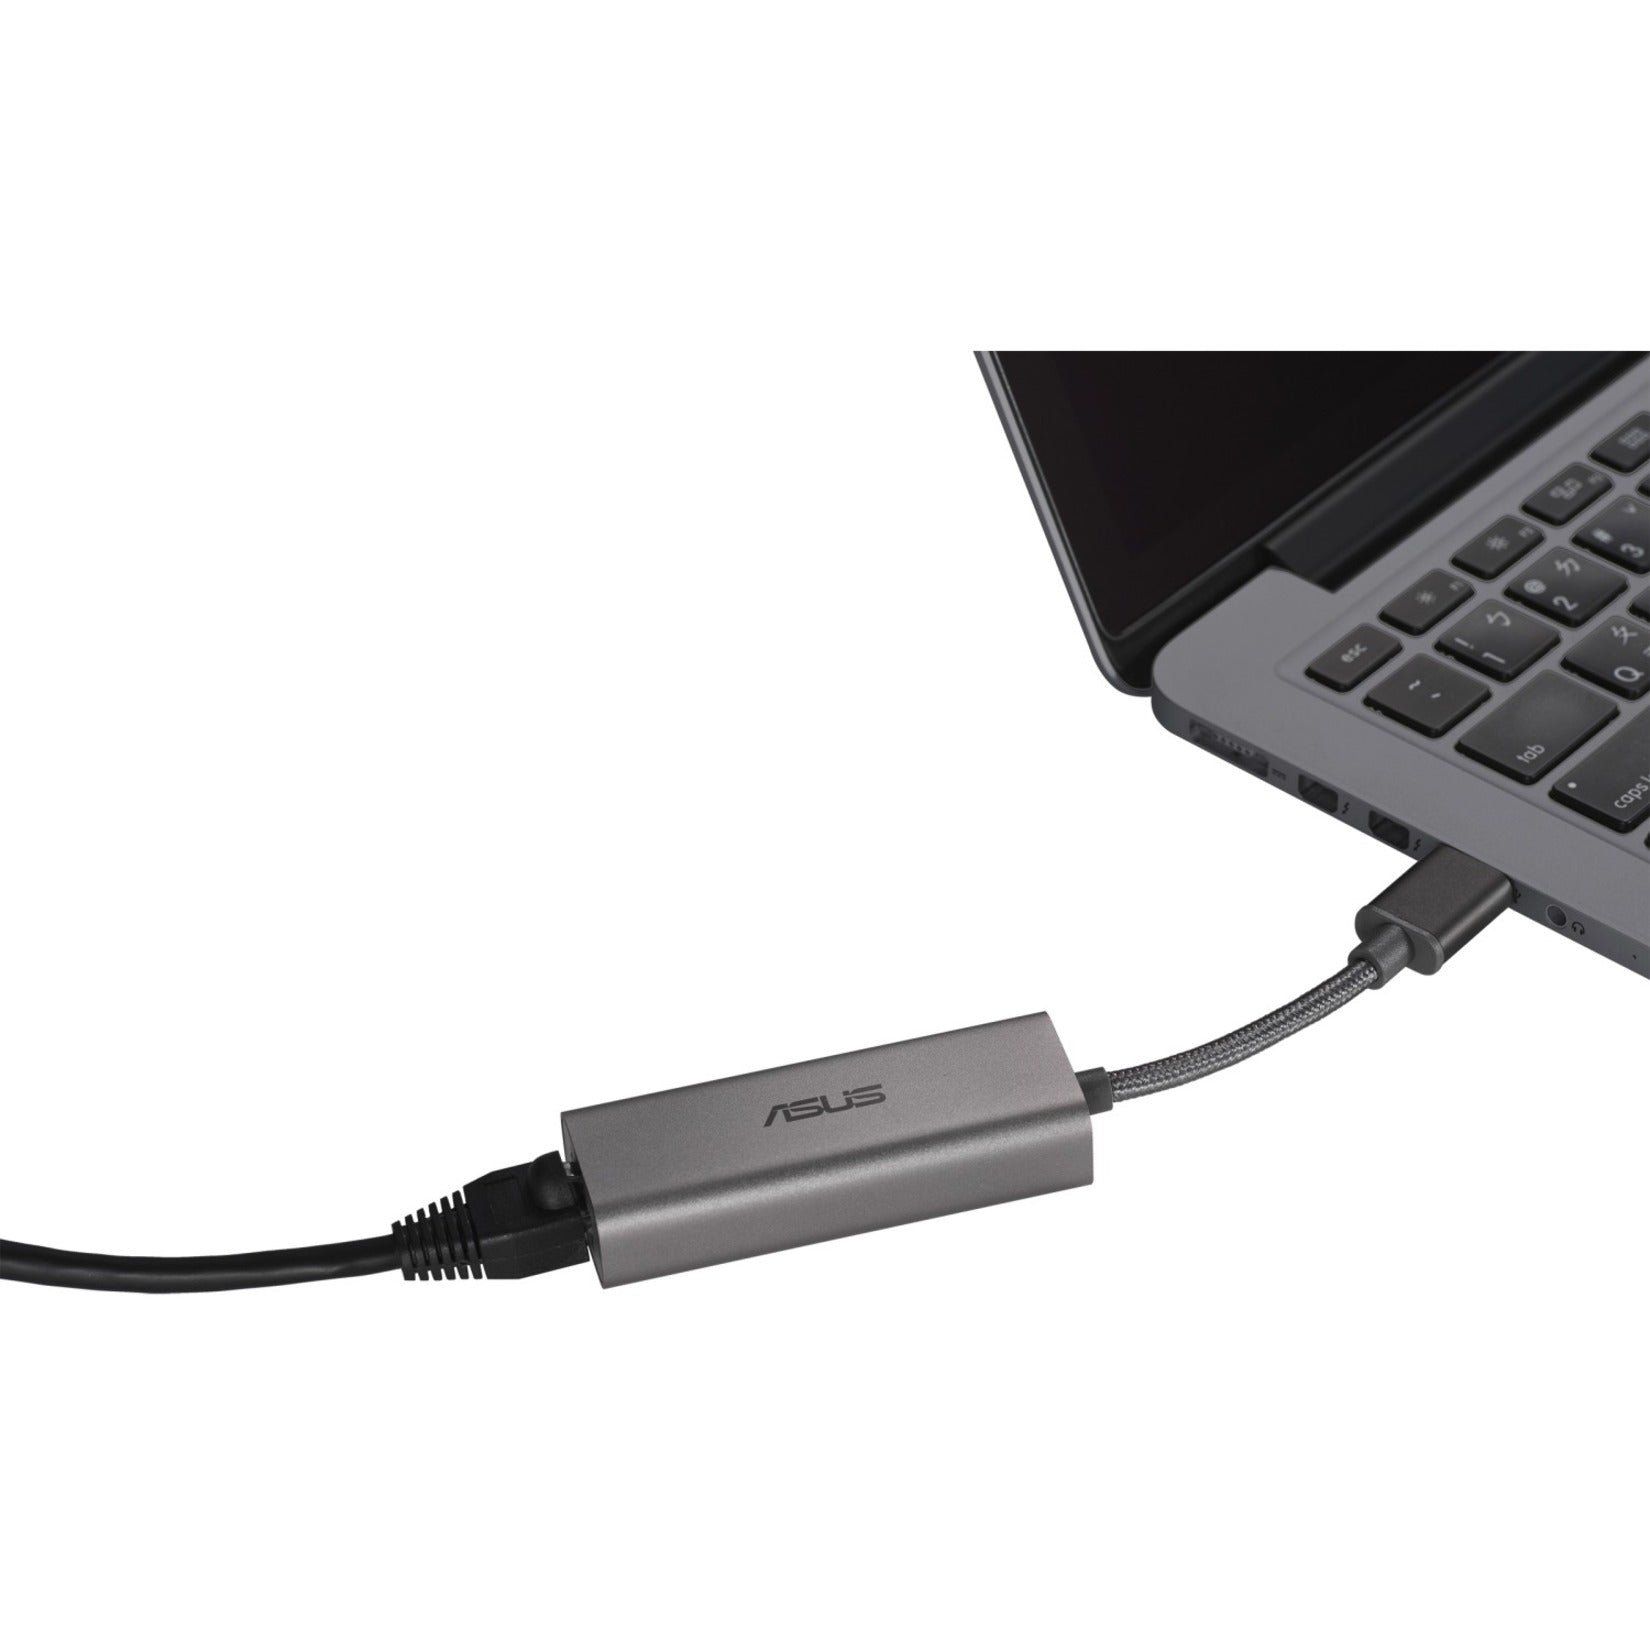 Asus USB-C2500 2.5Gigabit Ethernet Adapter, High-Speed Internet Connection for NAS Storage Device/Computer/Notebook